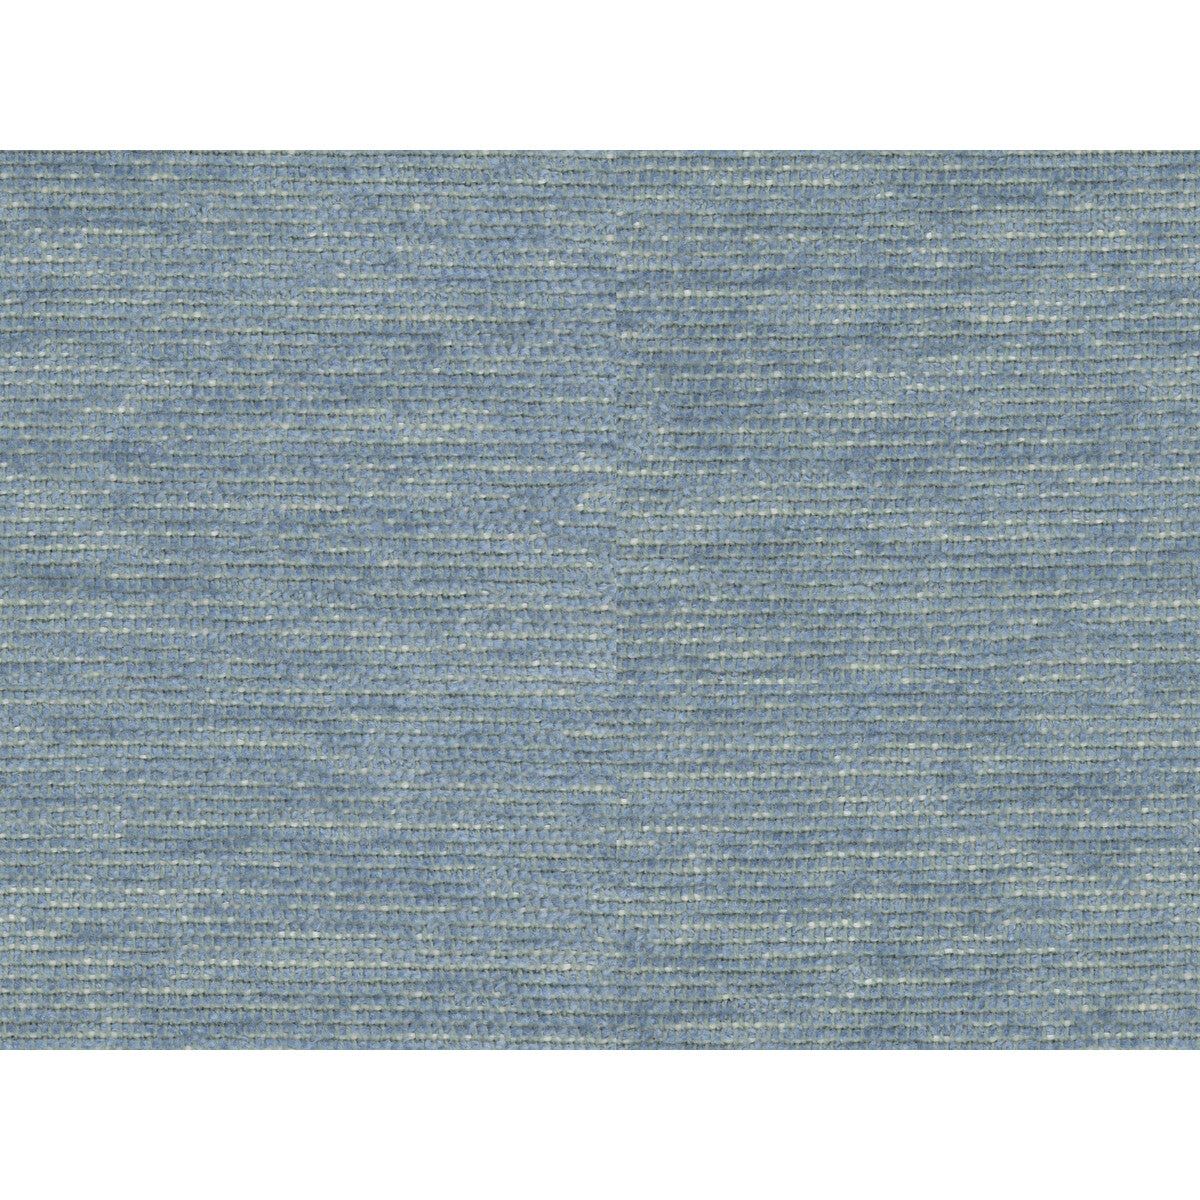 Revard Chenille fabric in sky blue color - pattern 8016107.15.0 - by Brunschwig &amp; Fils in the Chambery Textures collection